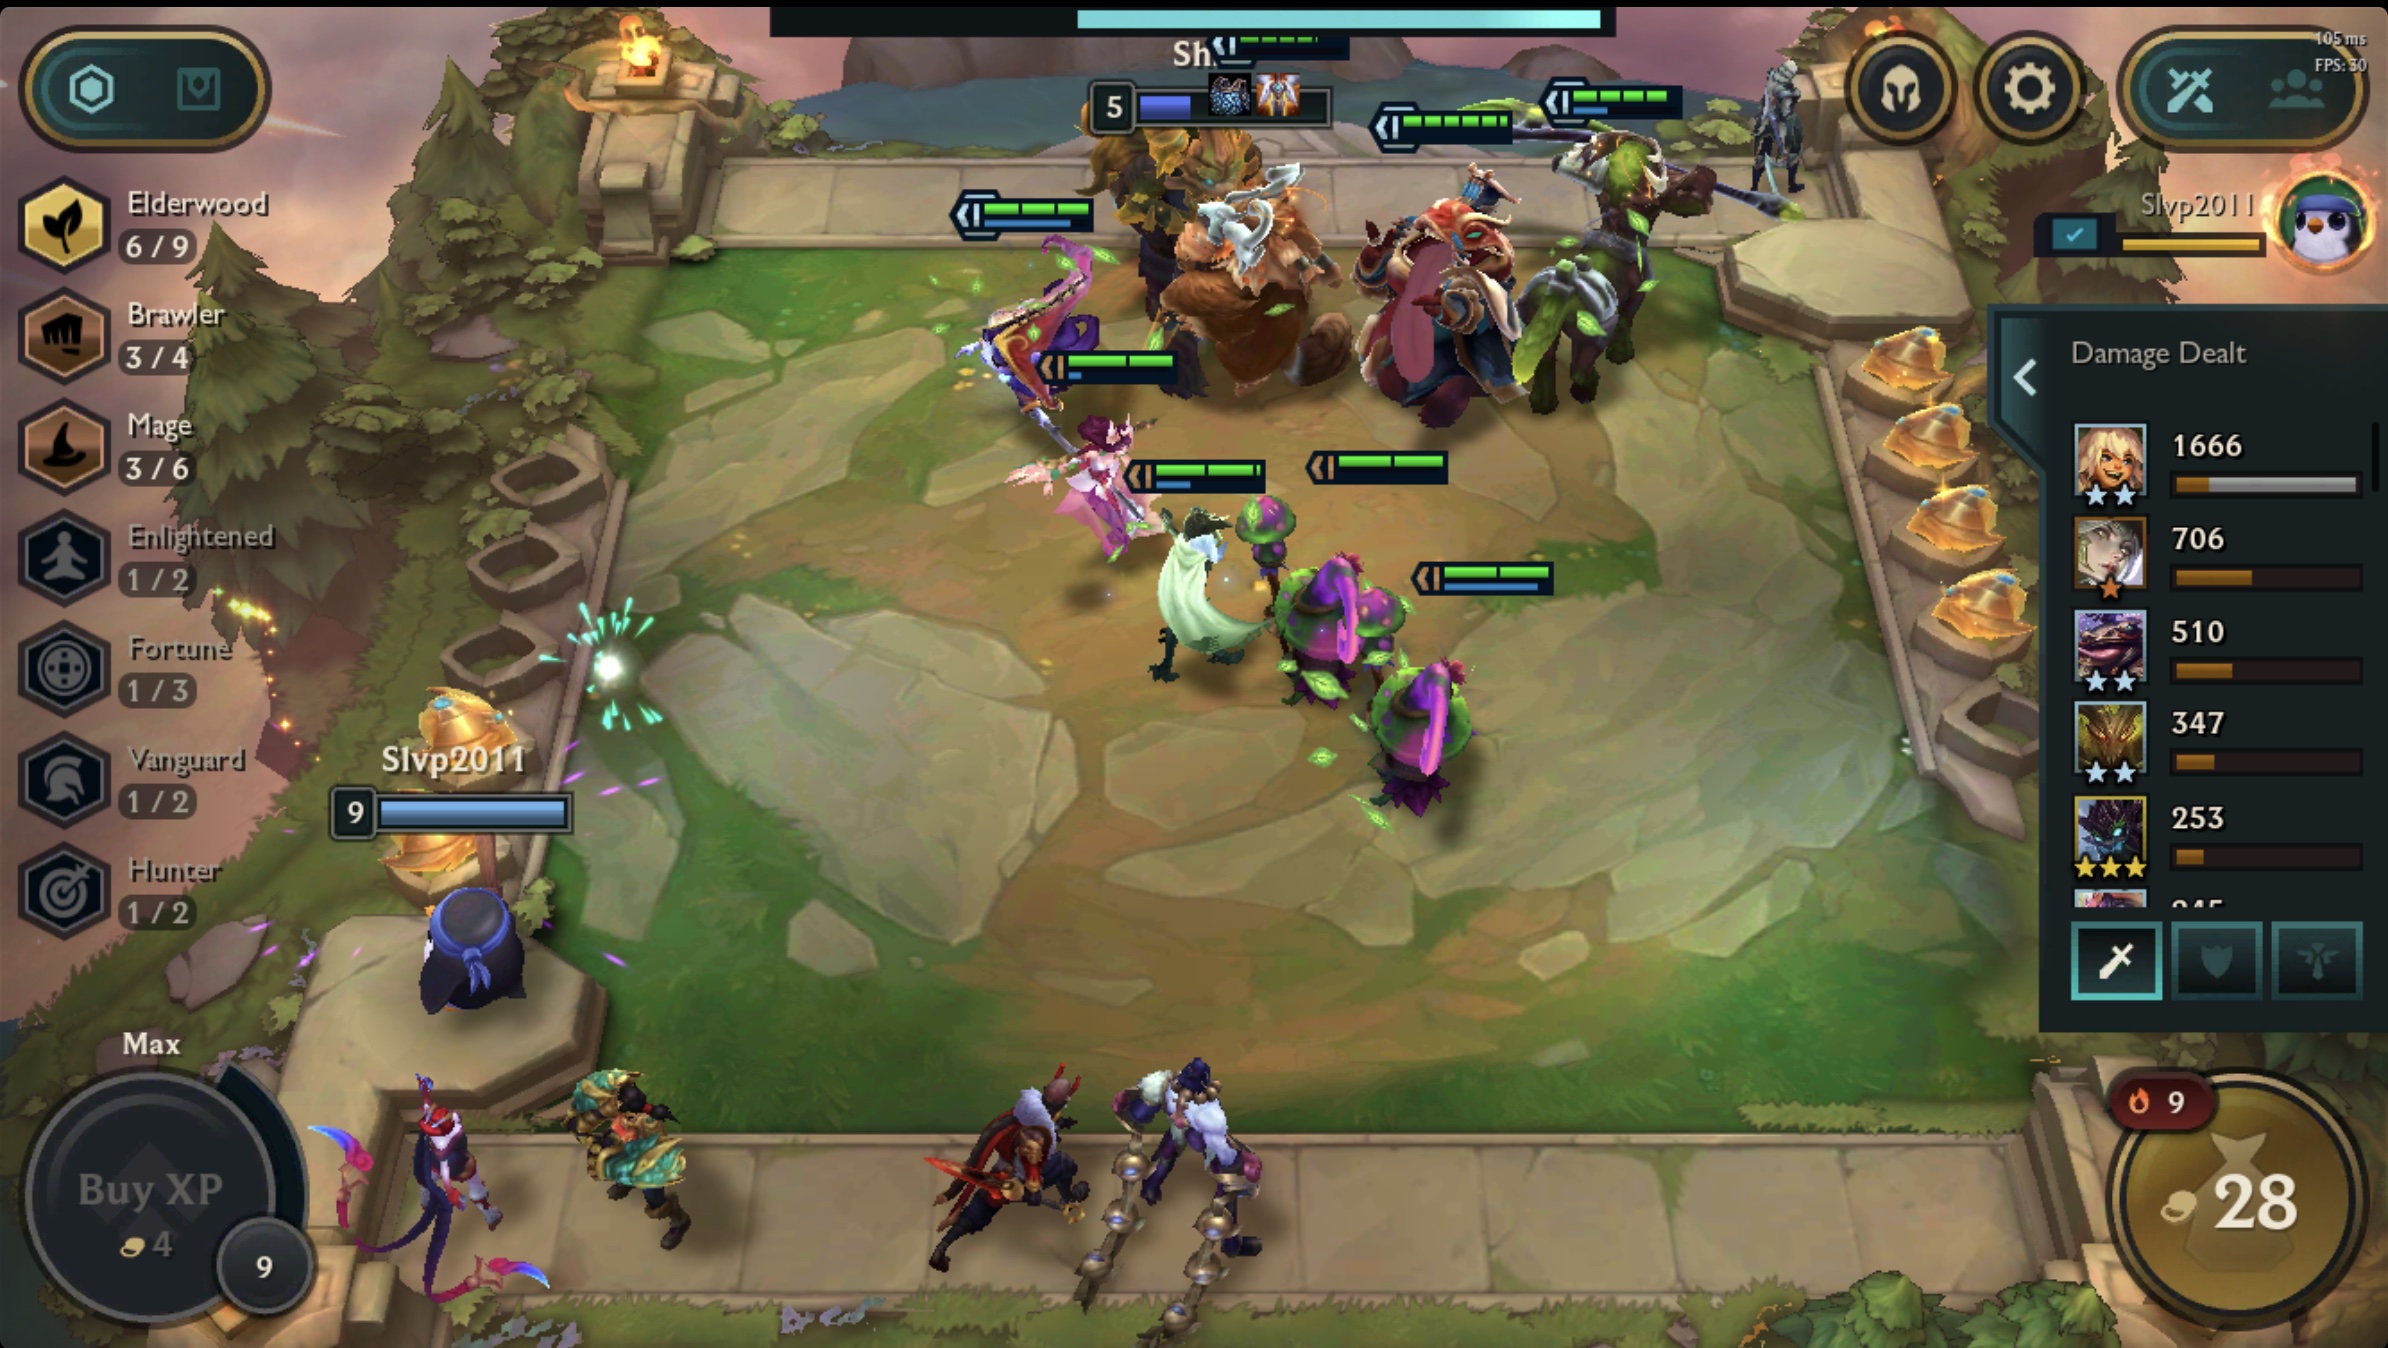 Giao diện game teamfight tactics